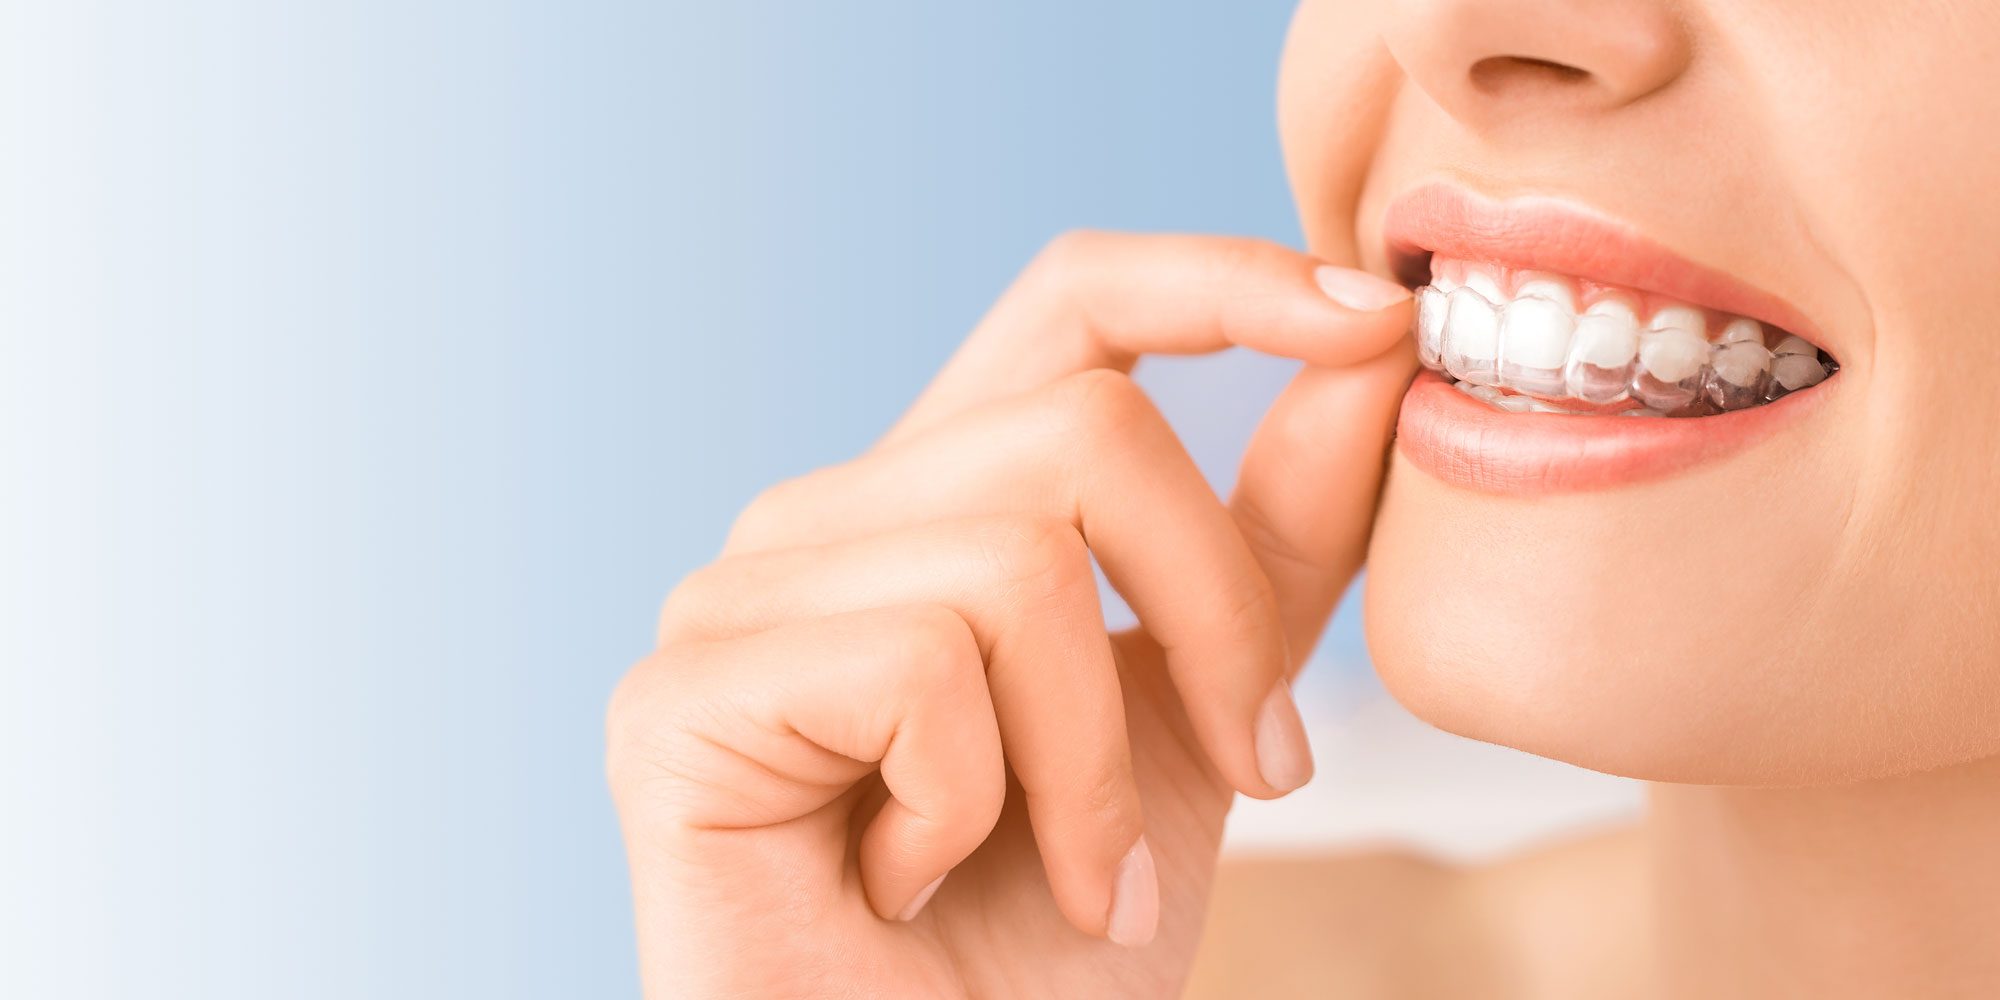 Need To Change Invisalign Doctors? Here’s How